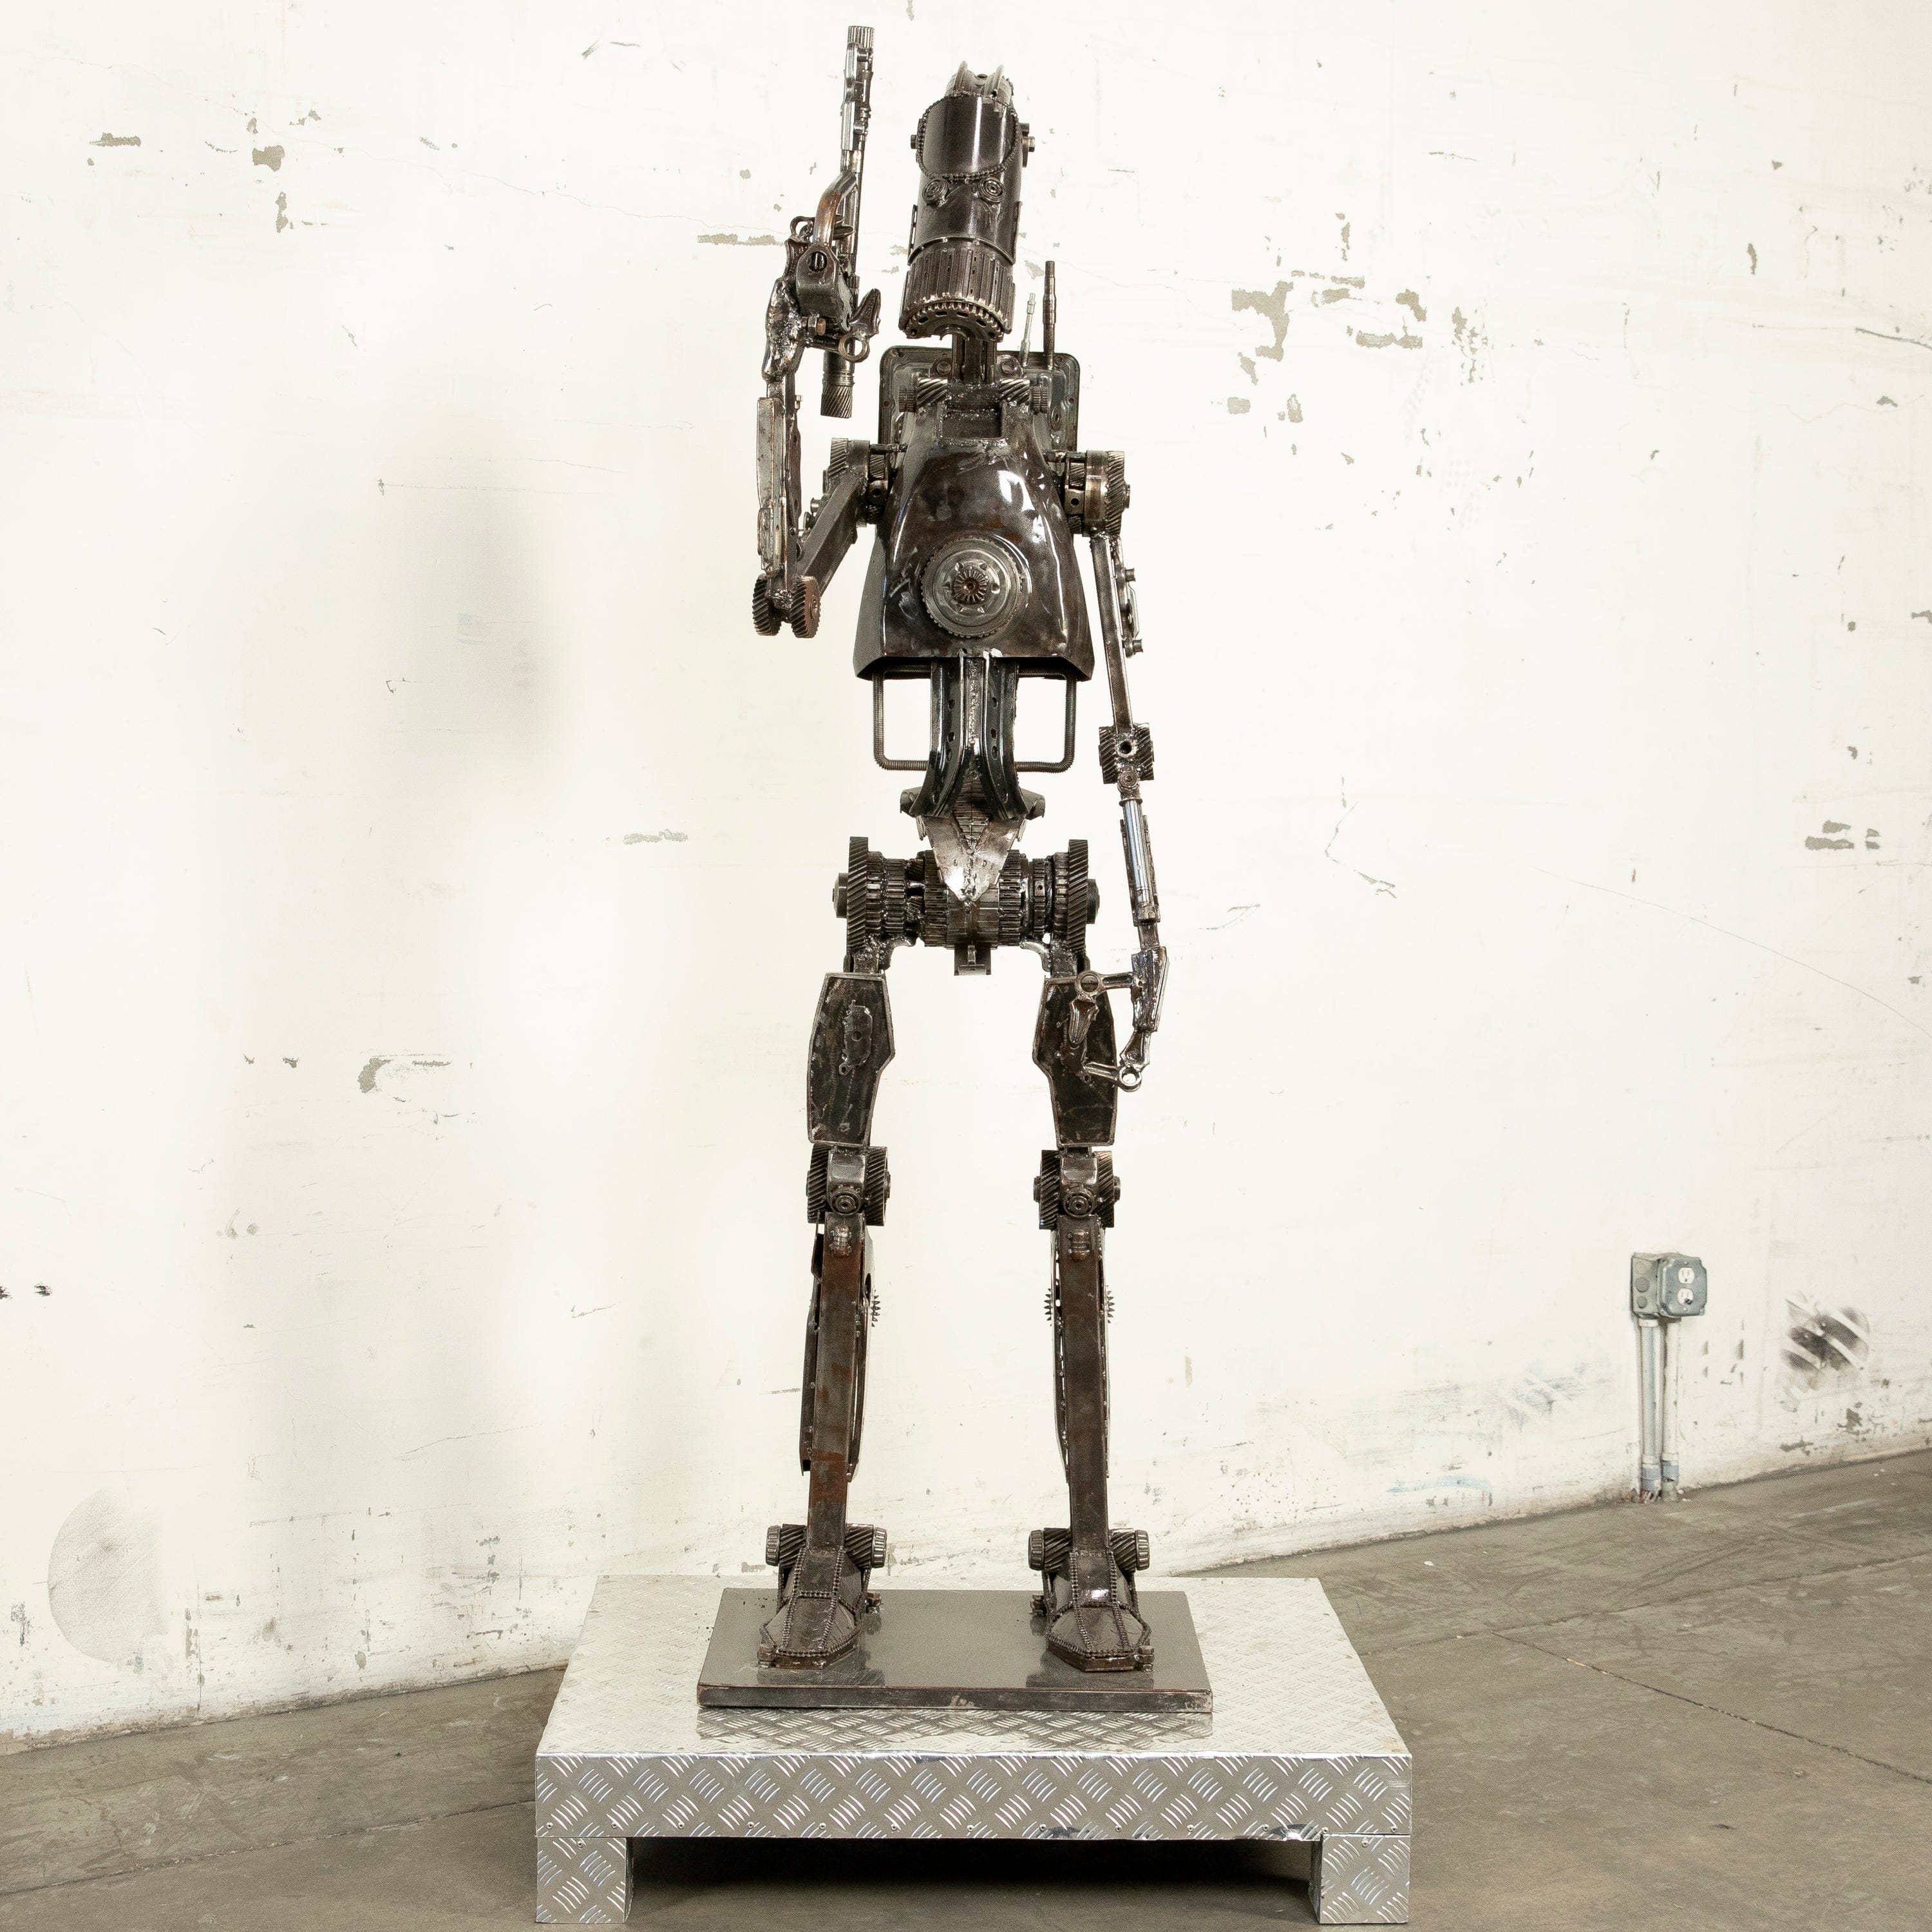 KALIFANO Recycled Metal Art 79" Droid Inspired Recycled Metal Sculpture RMS-DROID200-N